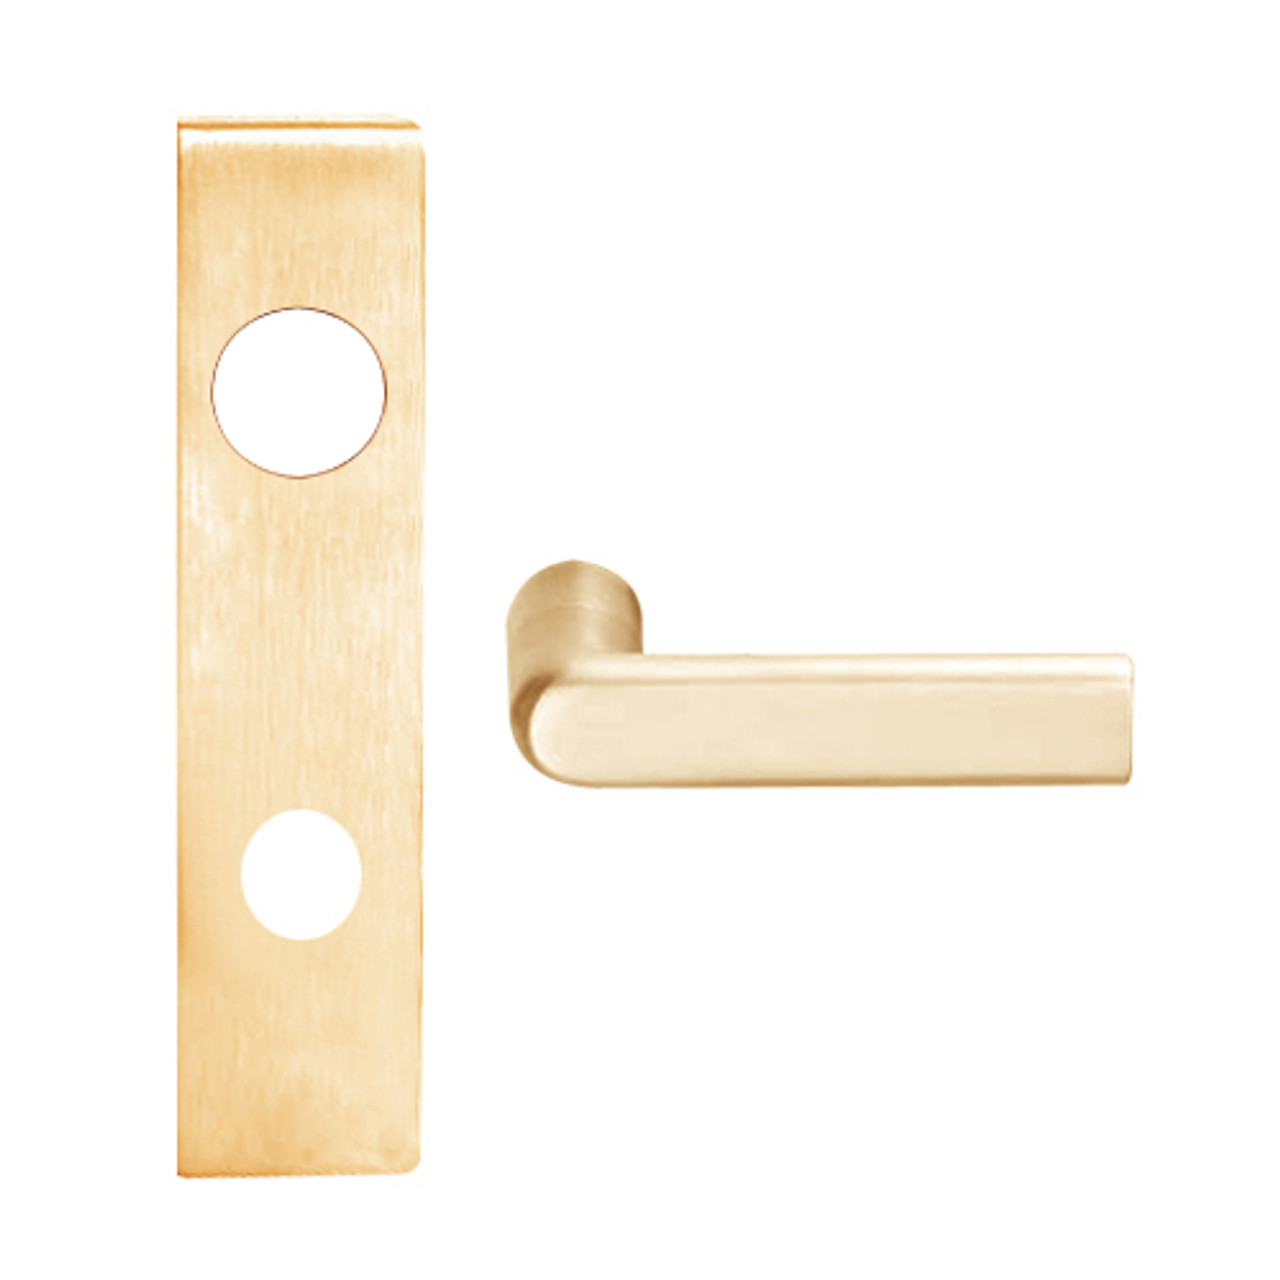 L9026J-01L-612 Schlage L Series Exit Lock with Cylinder Commercial Mortise Lock with 01 Cast Lever Design Prepped for FSIC in Satin Bronze